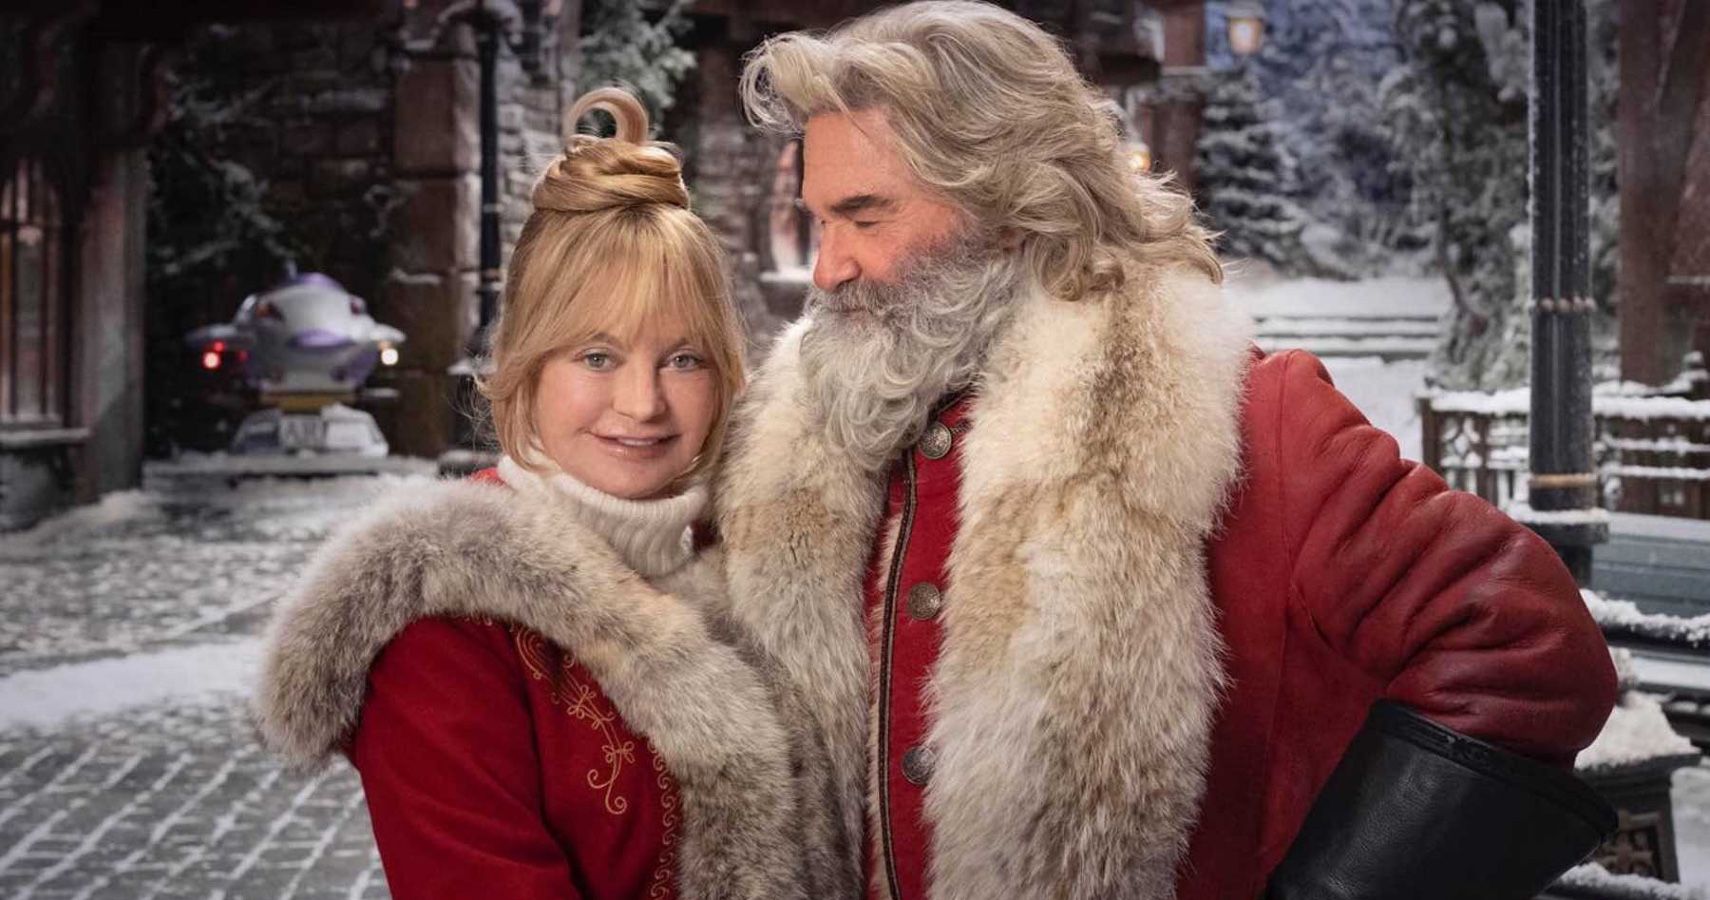 Goldie Hawn and Kurt Russell as Mrs. Claus and Santa Claus